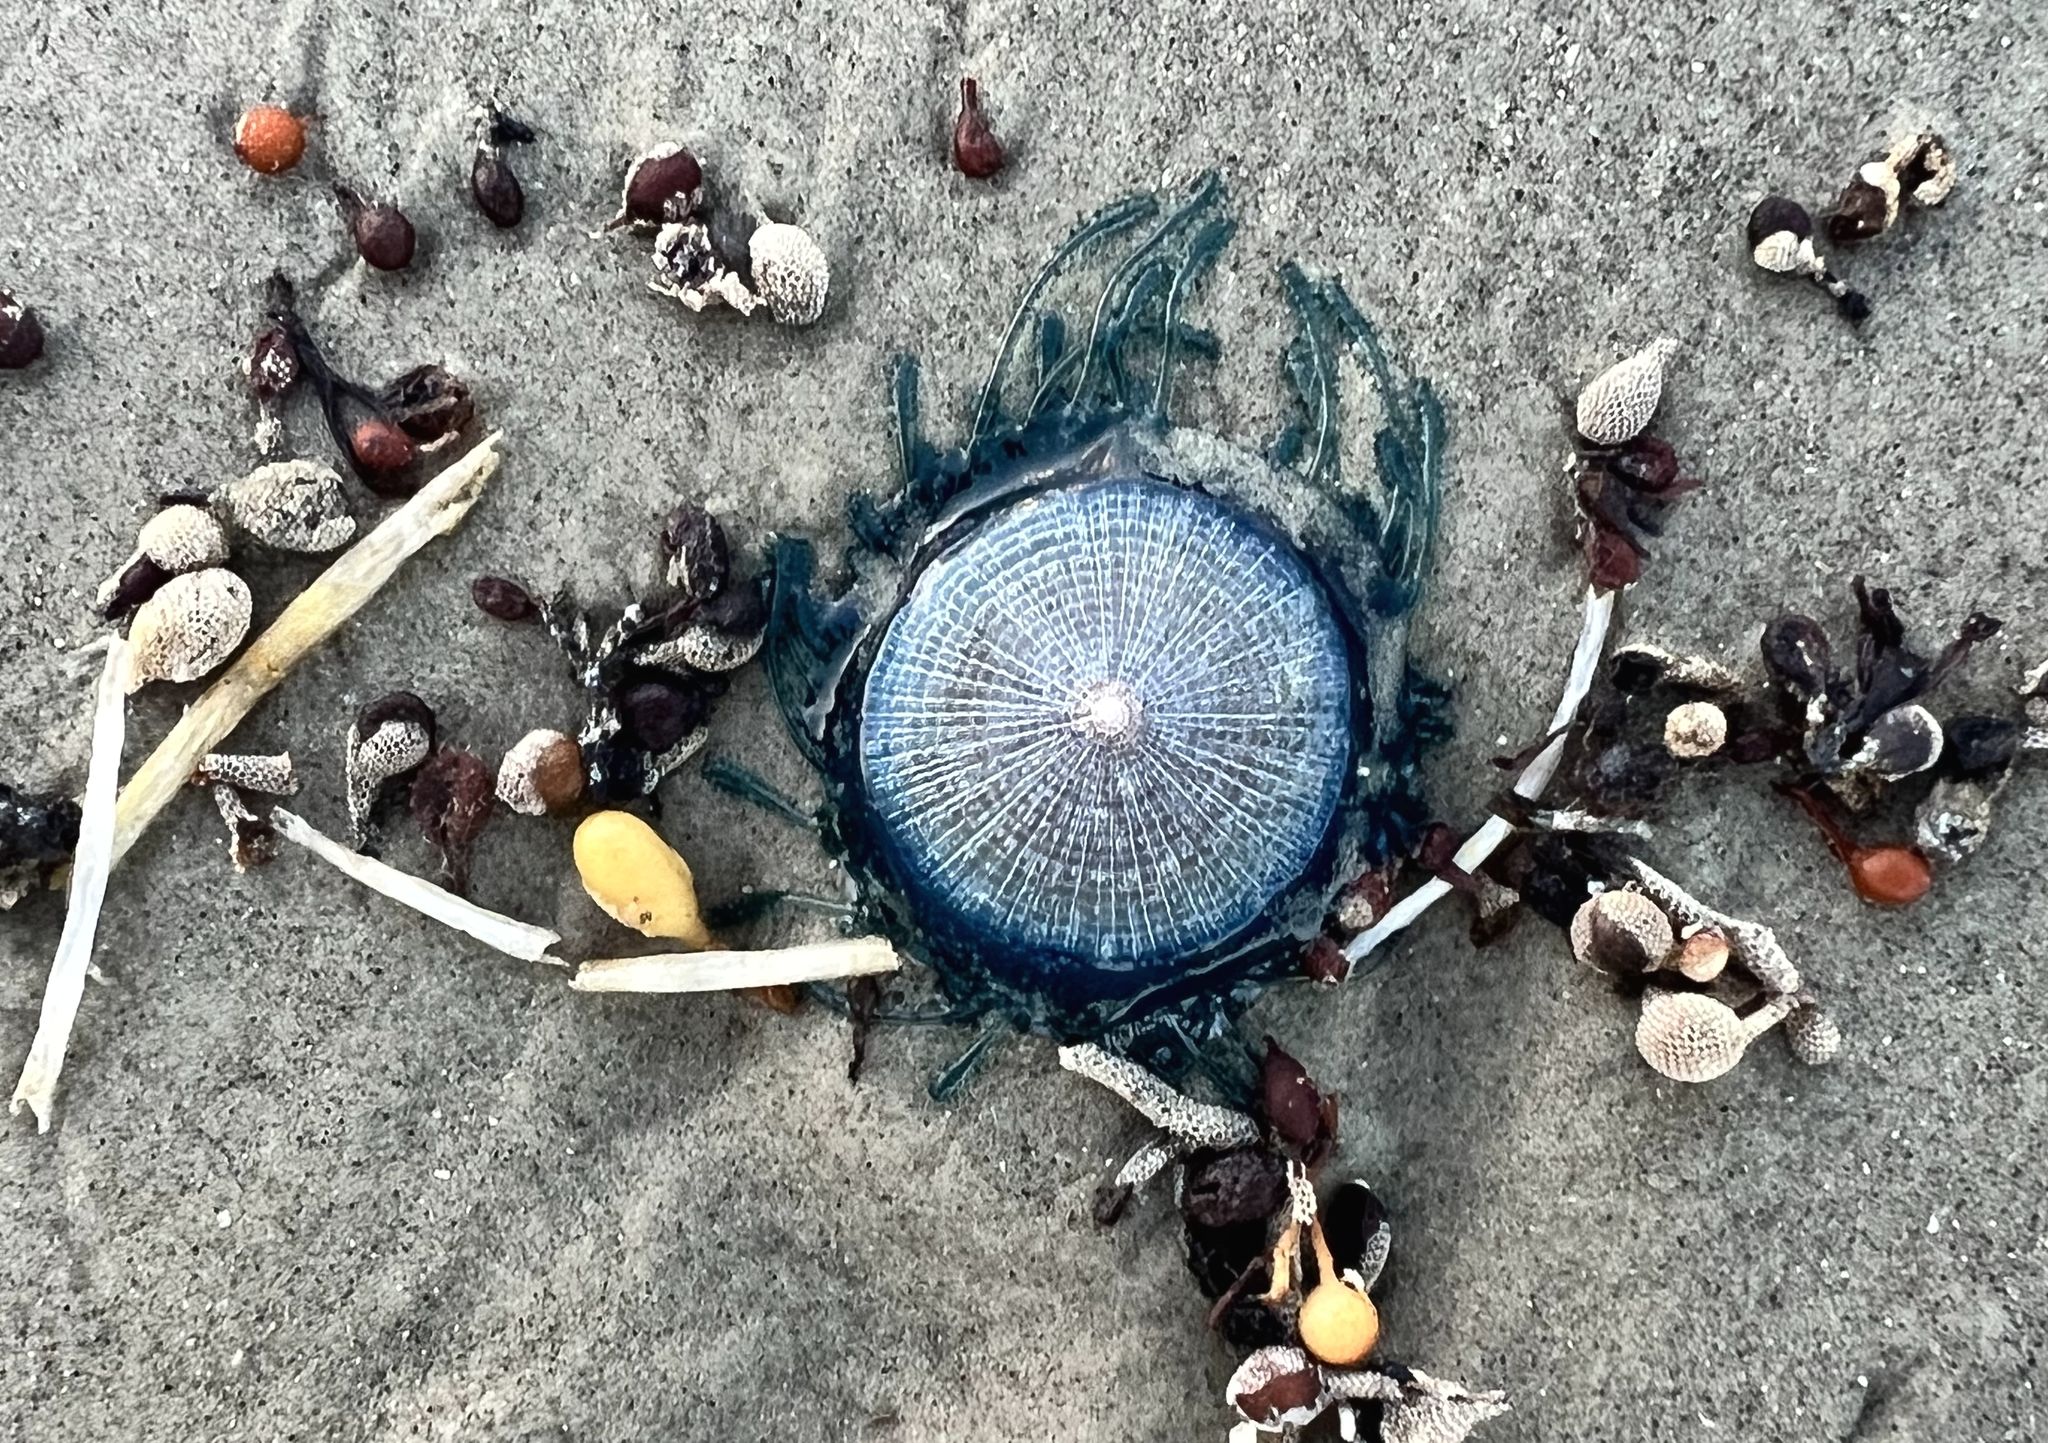 Beware of sting from tiny blue creatures washing up in Texas